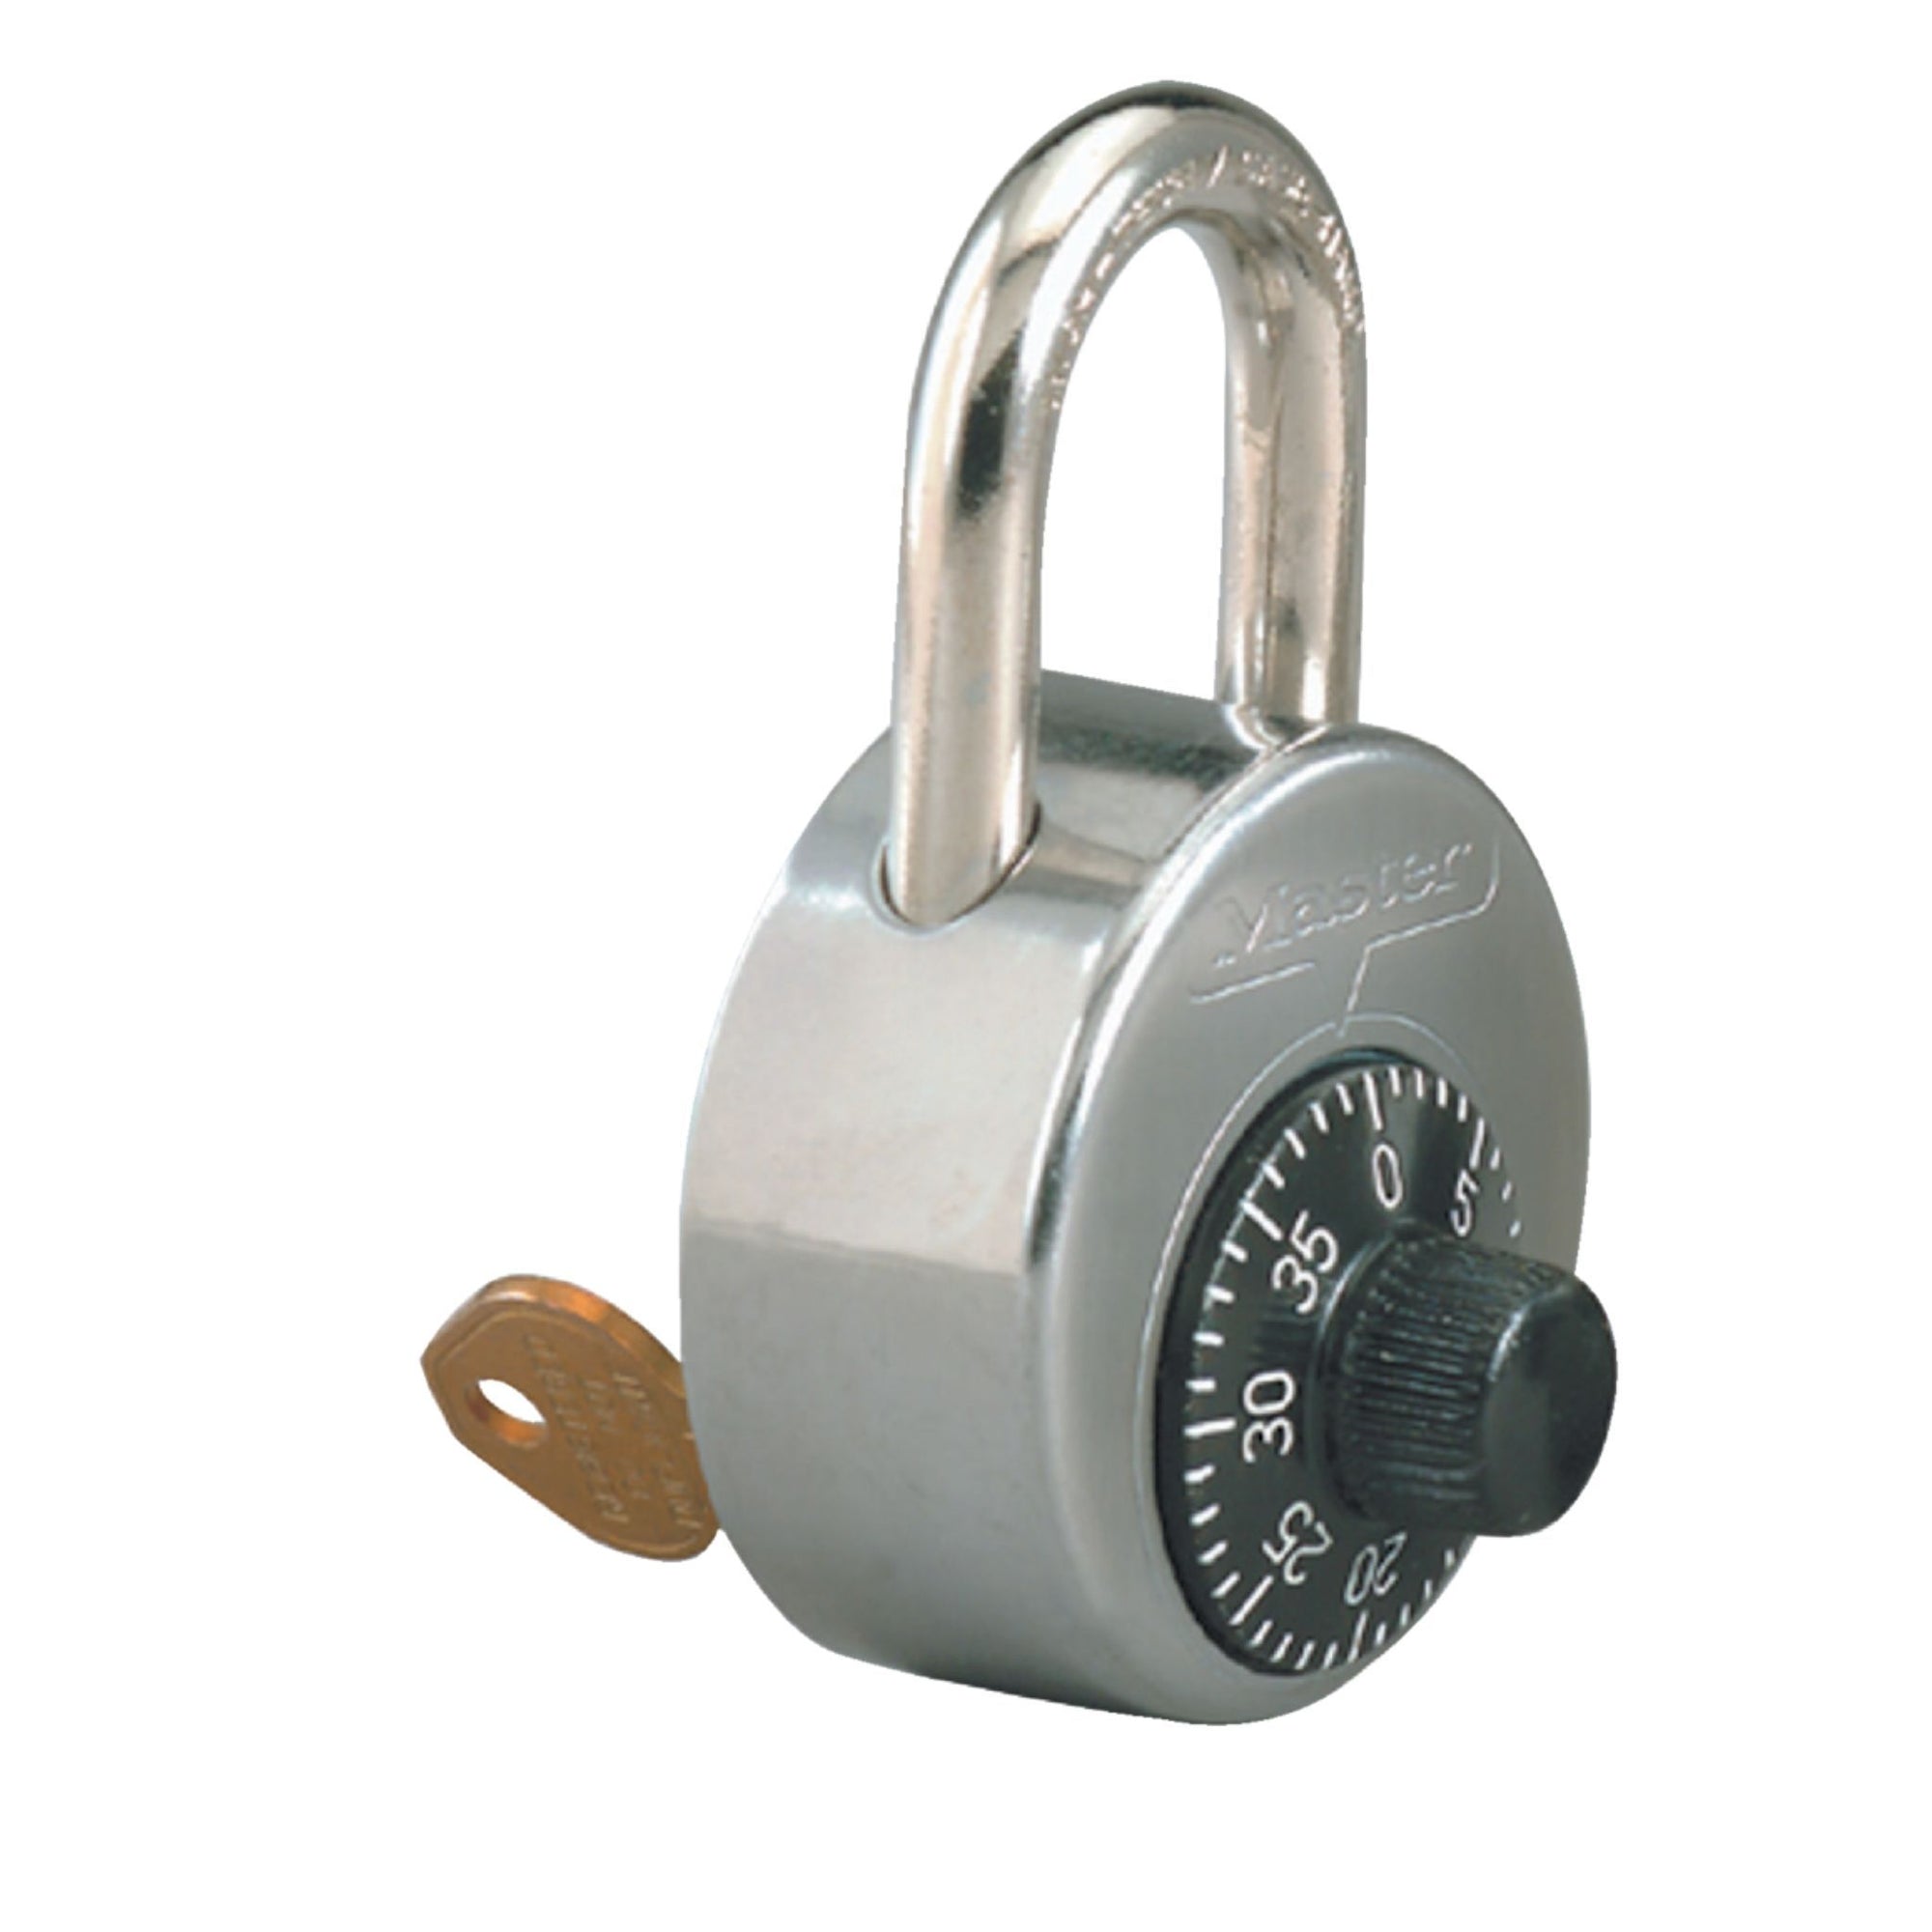 Master Lock 2010 High Security Combination Padlock with Key Control Feature - The Lock Source